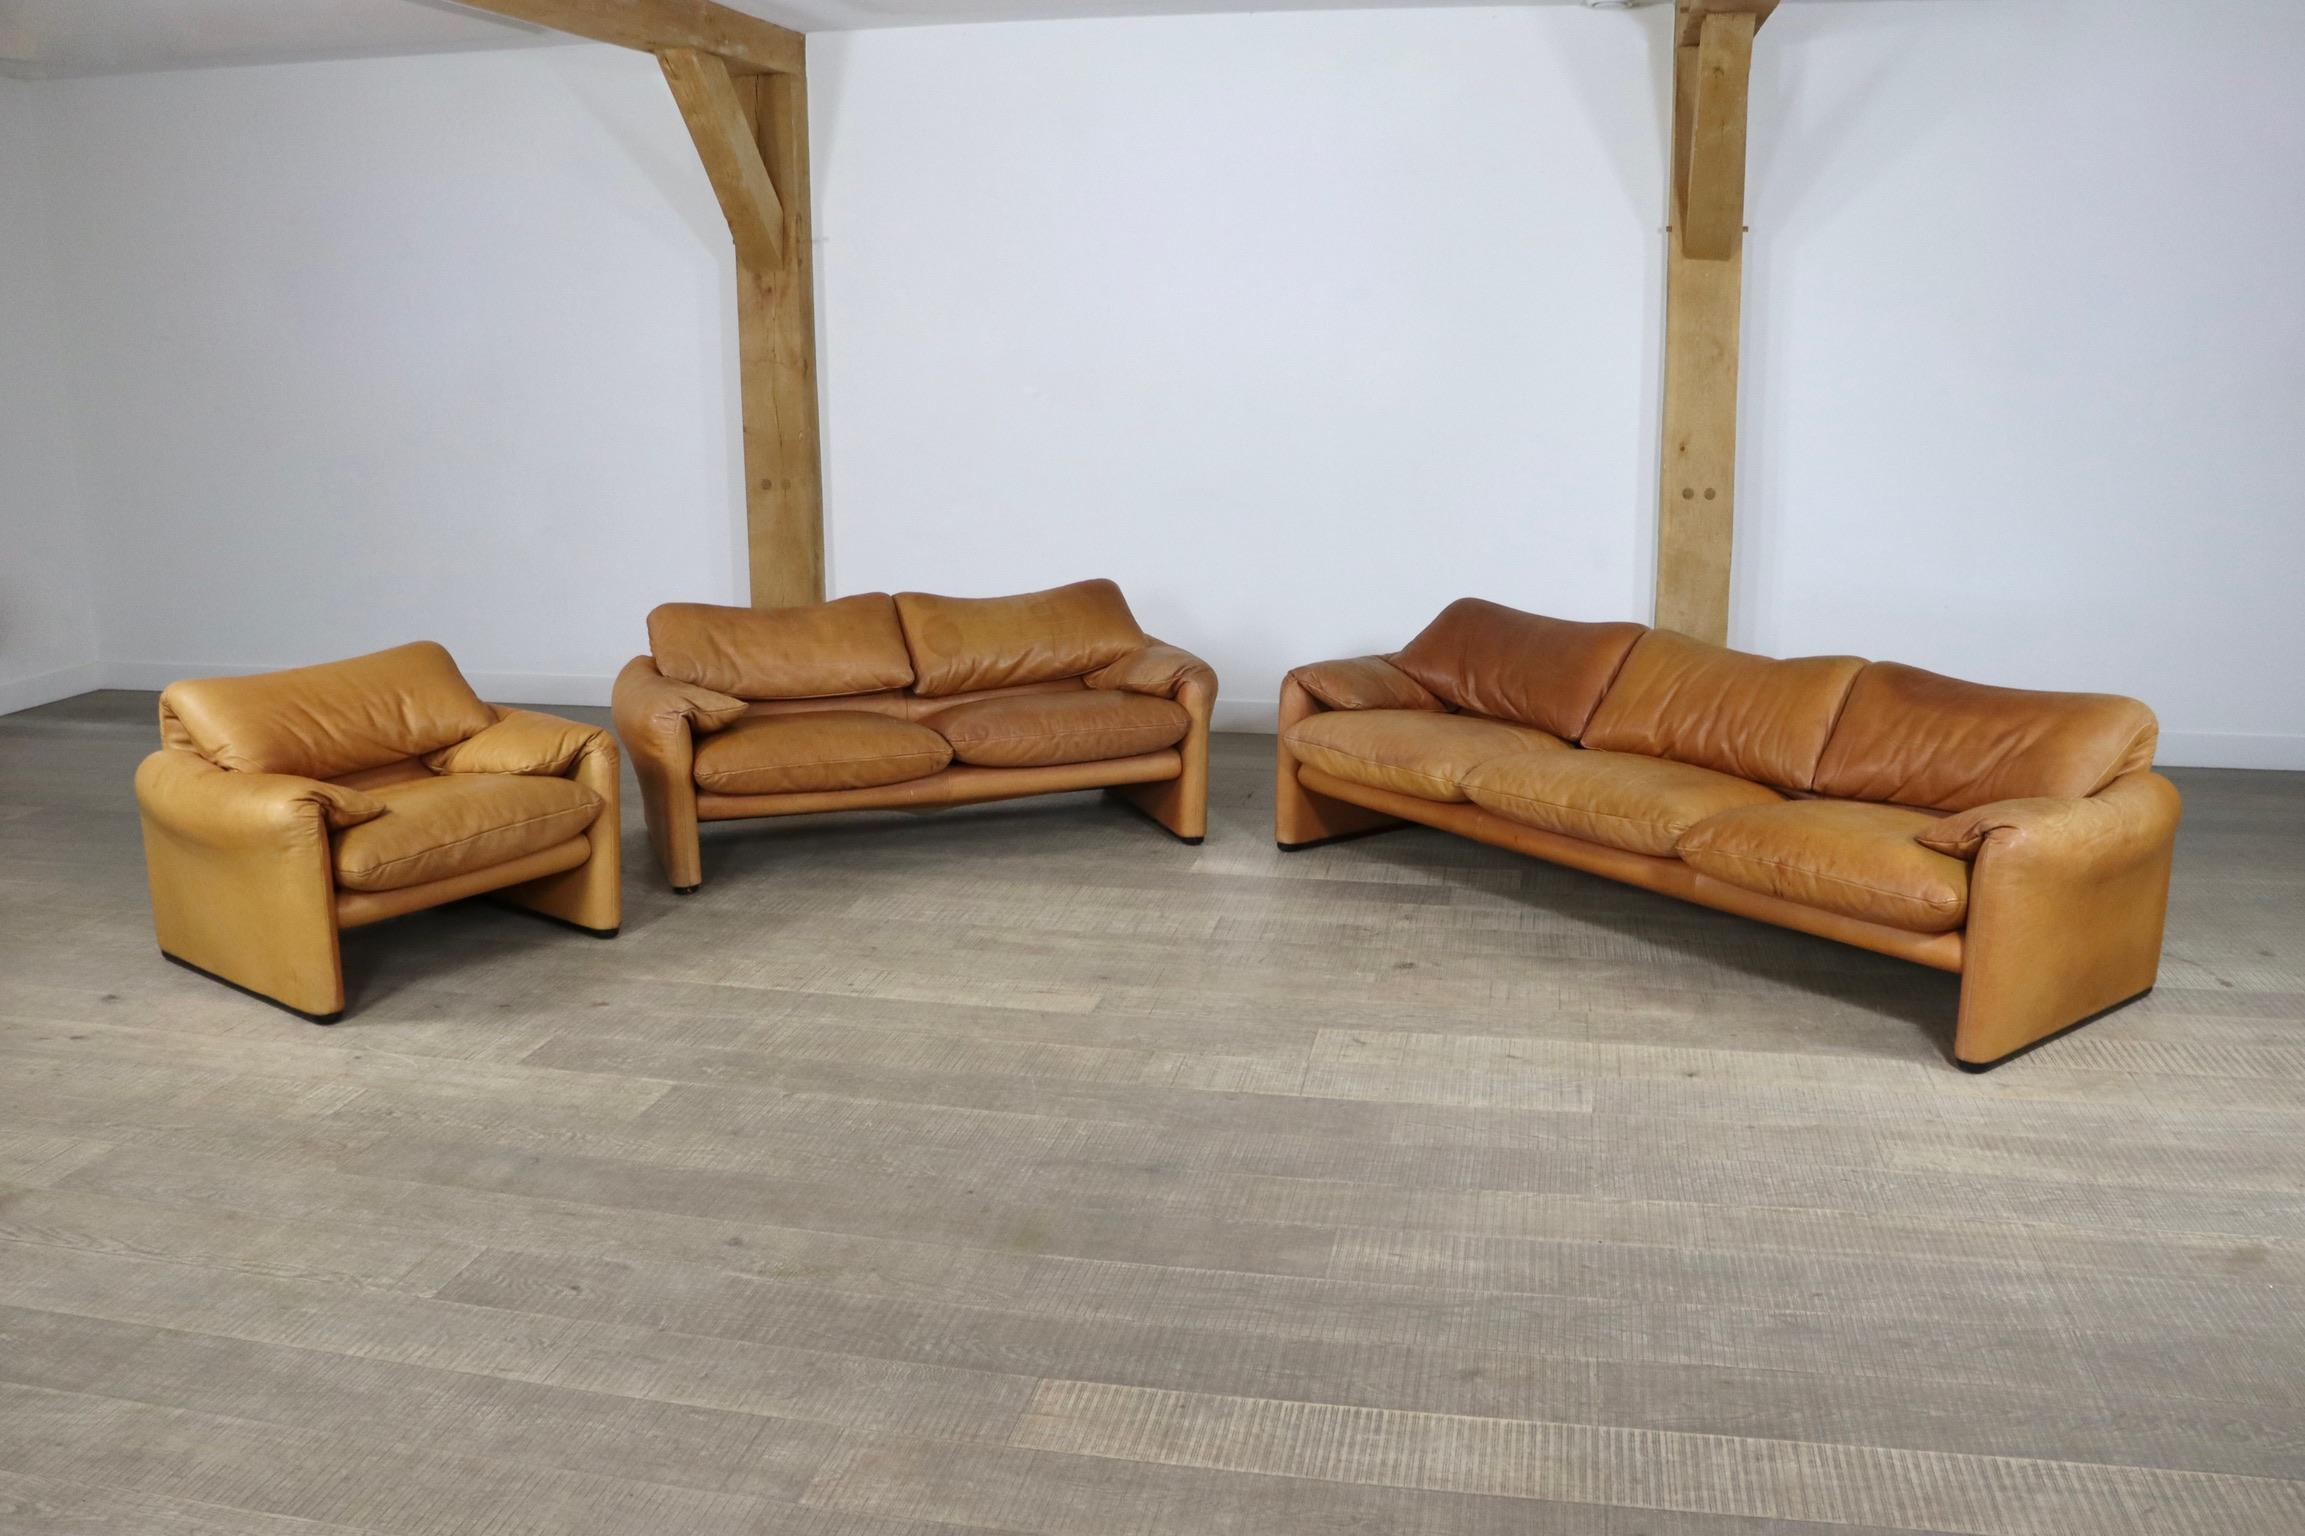 Stunning set of two Maralunga sofas and a lounge chair, by Vico Magistretti for Cassina in the original cognac leather upholstery which has obtained a beautiful patina over the years. 
This design is known for its high comfort and adjustable